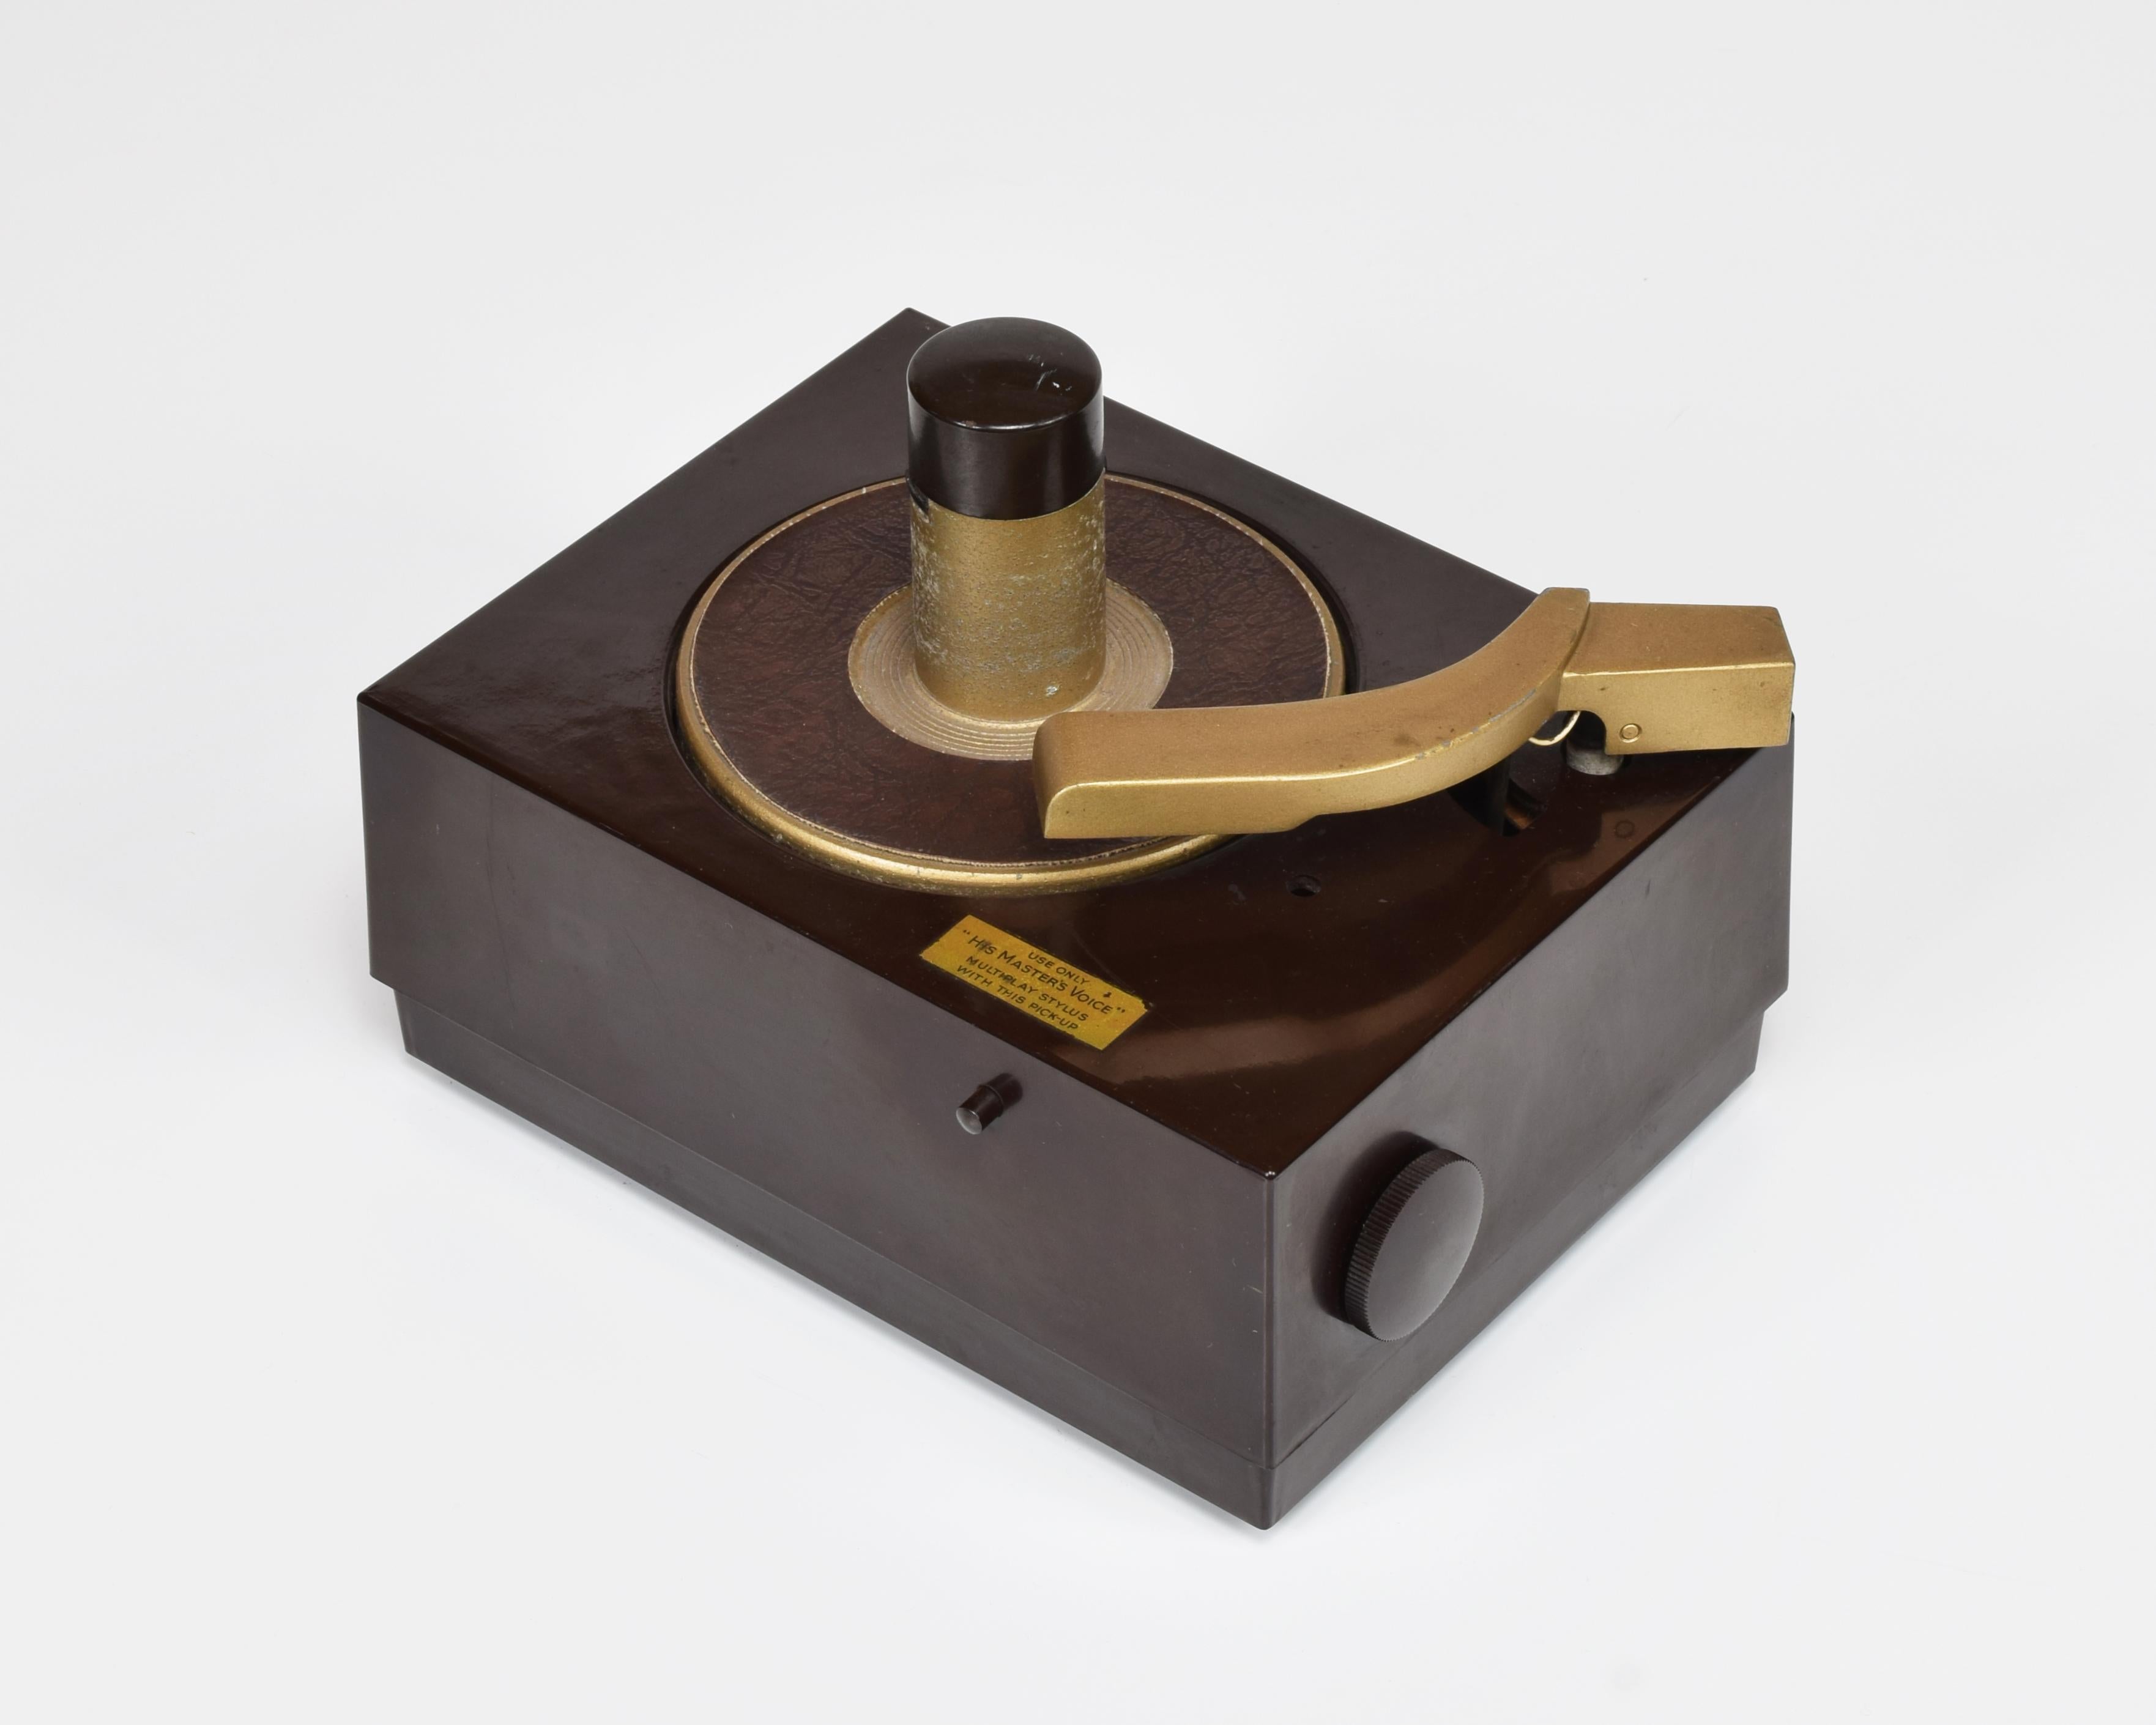 His Masters Voice (HMV), UK (manufacturer)
Model 2107A (RCA 45-J equivalent) 45rpm record player with record-changer facility
Manufactured under licence from RCA Victor
Designed 1949, manufactured c.1949-51
Bakelite case. Ceramic cartridge. Some